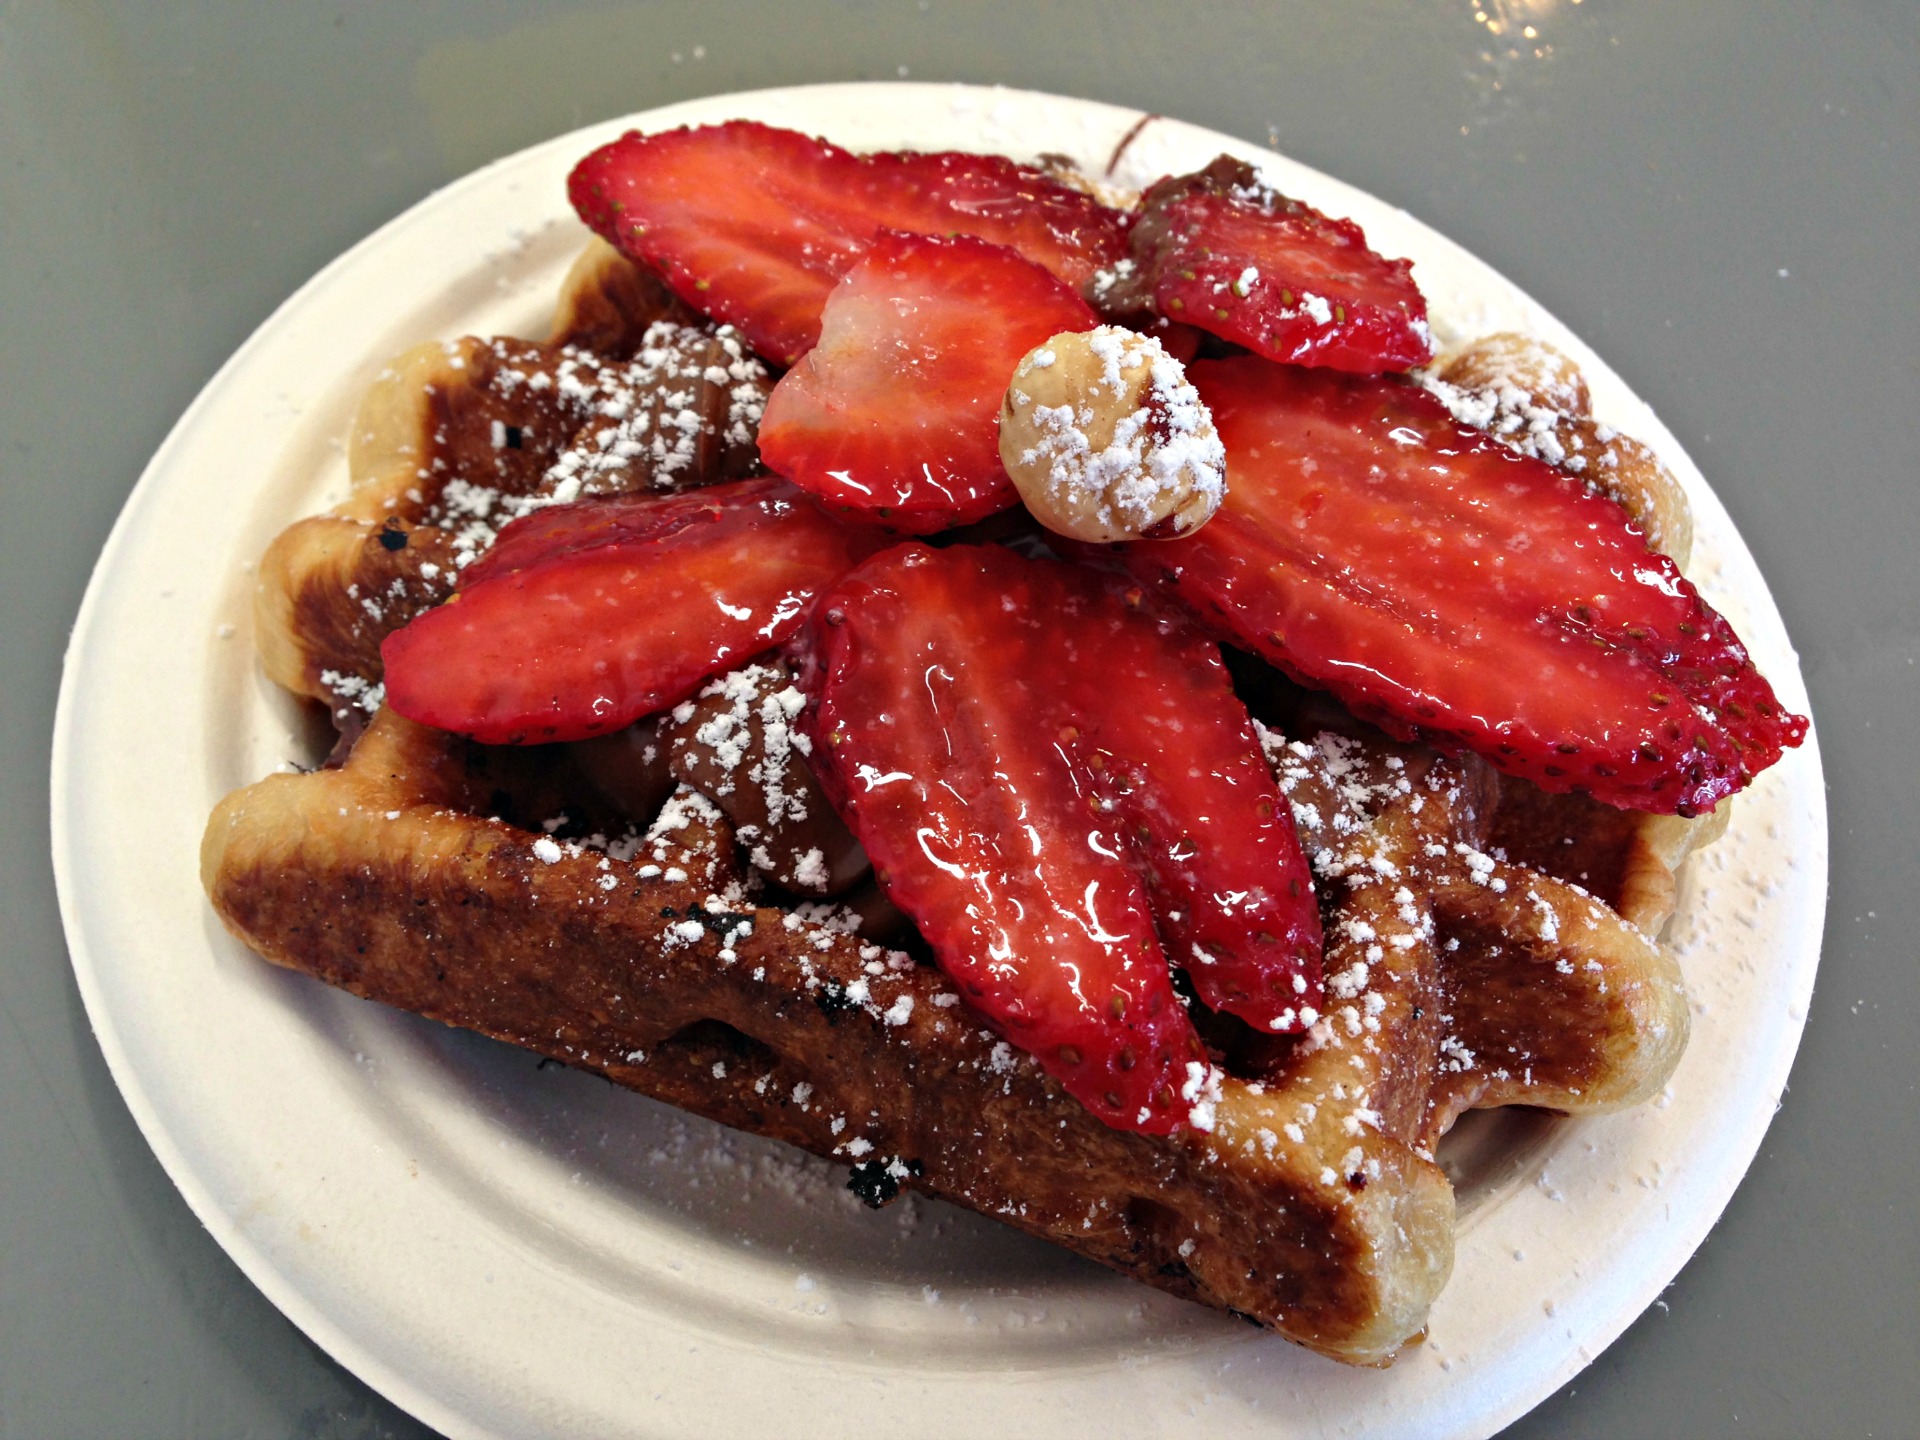 A Nutella and strawberry topped liege waffle at at Little Gem Belgian Waffles.